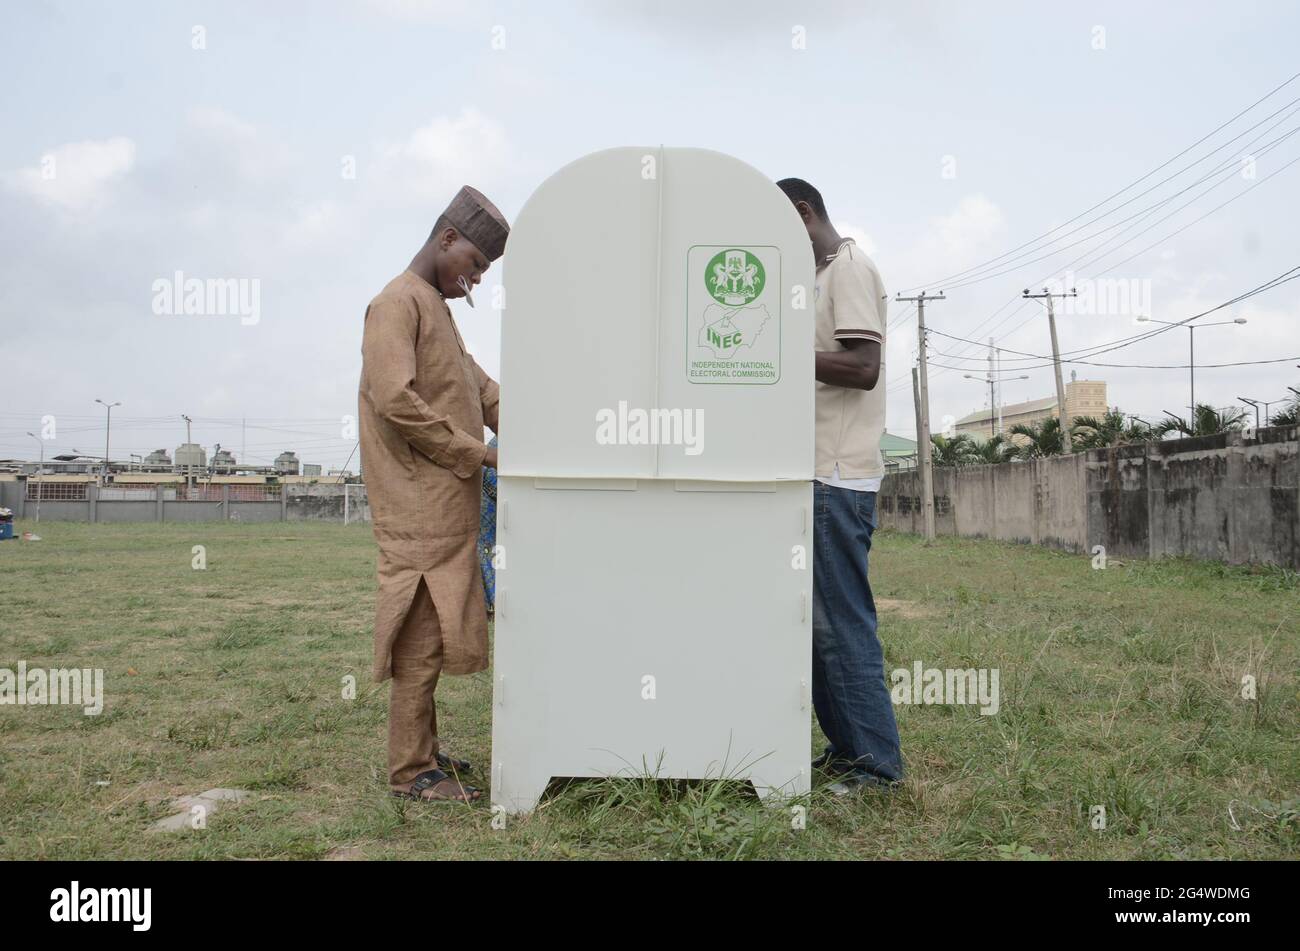 Voters cast a ballot at a polling station. Nigerians vote in Africas biggest democracy in a tight presidential race between incumbent Muhammadu Buhari and pro-market multimillionaire Atiku Abubakar. Lagos, Nigeria. Stock Photo